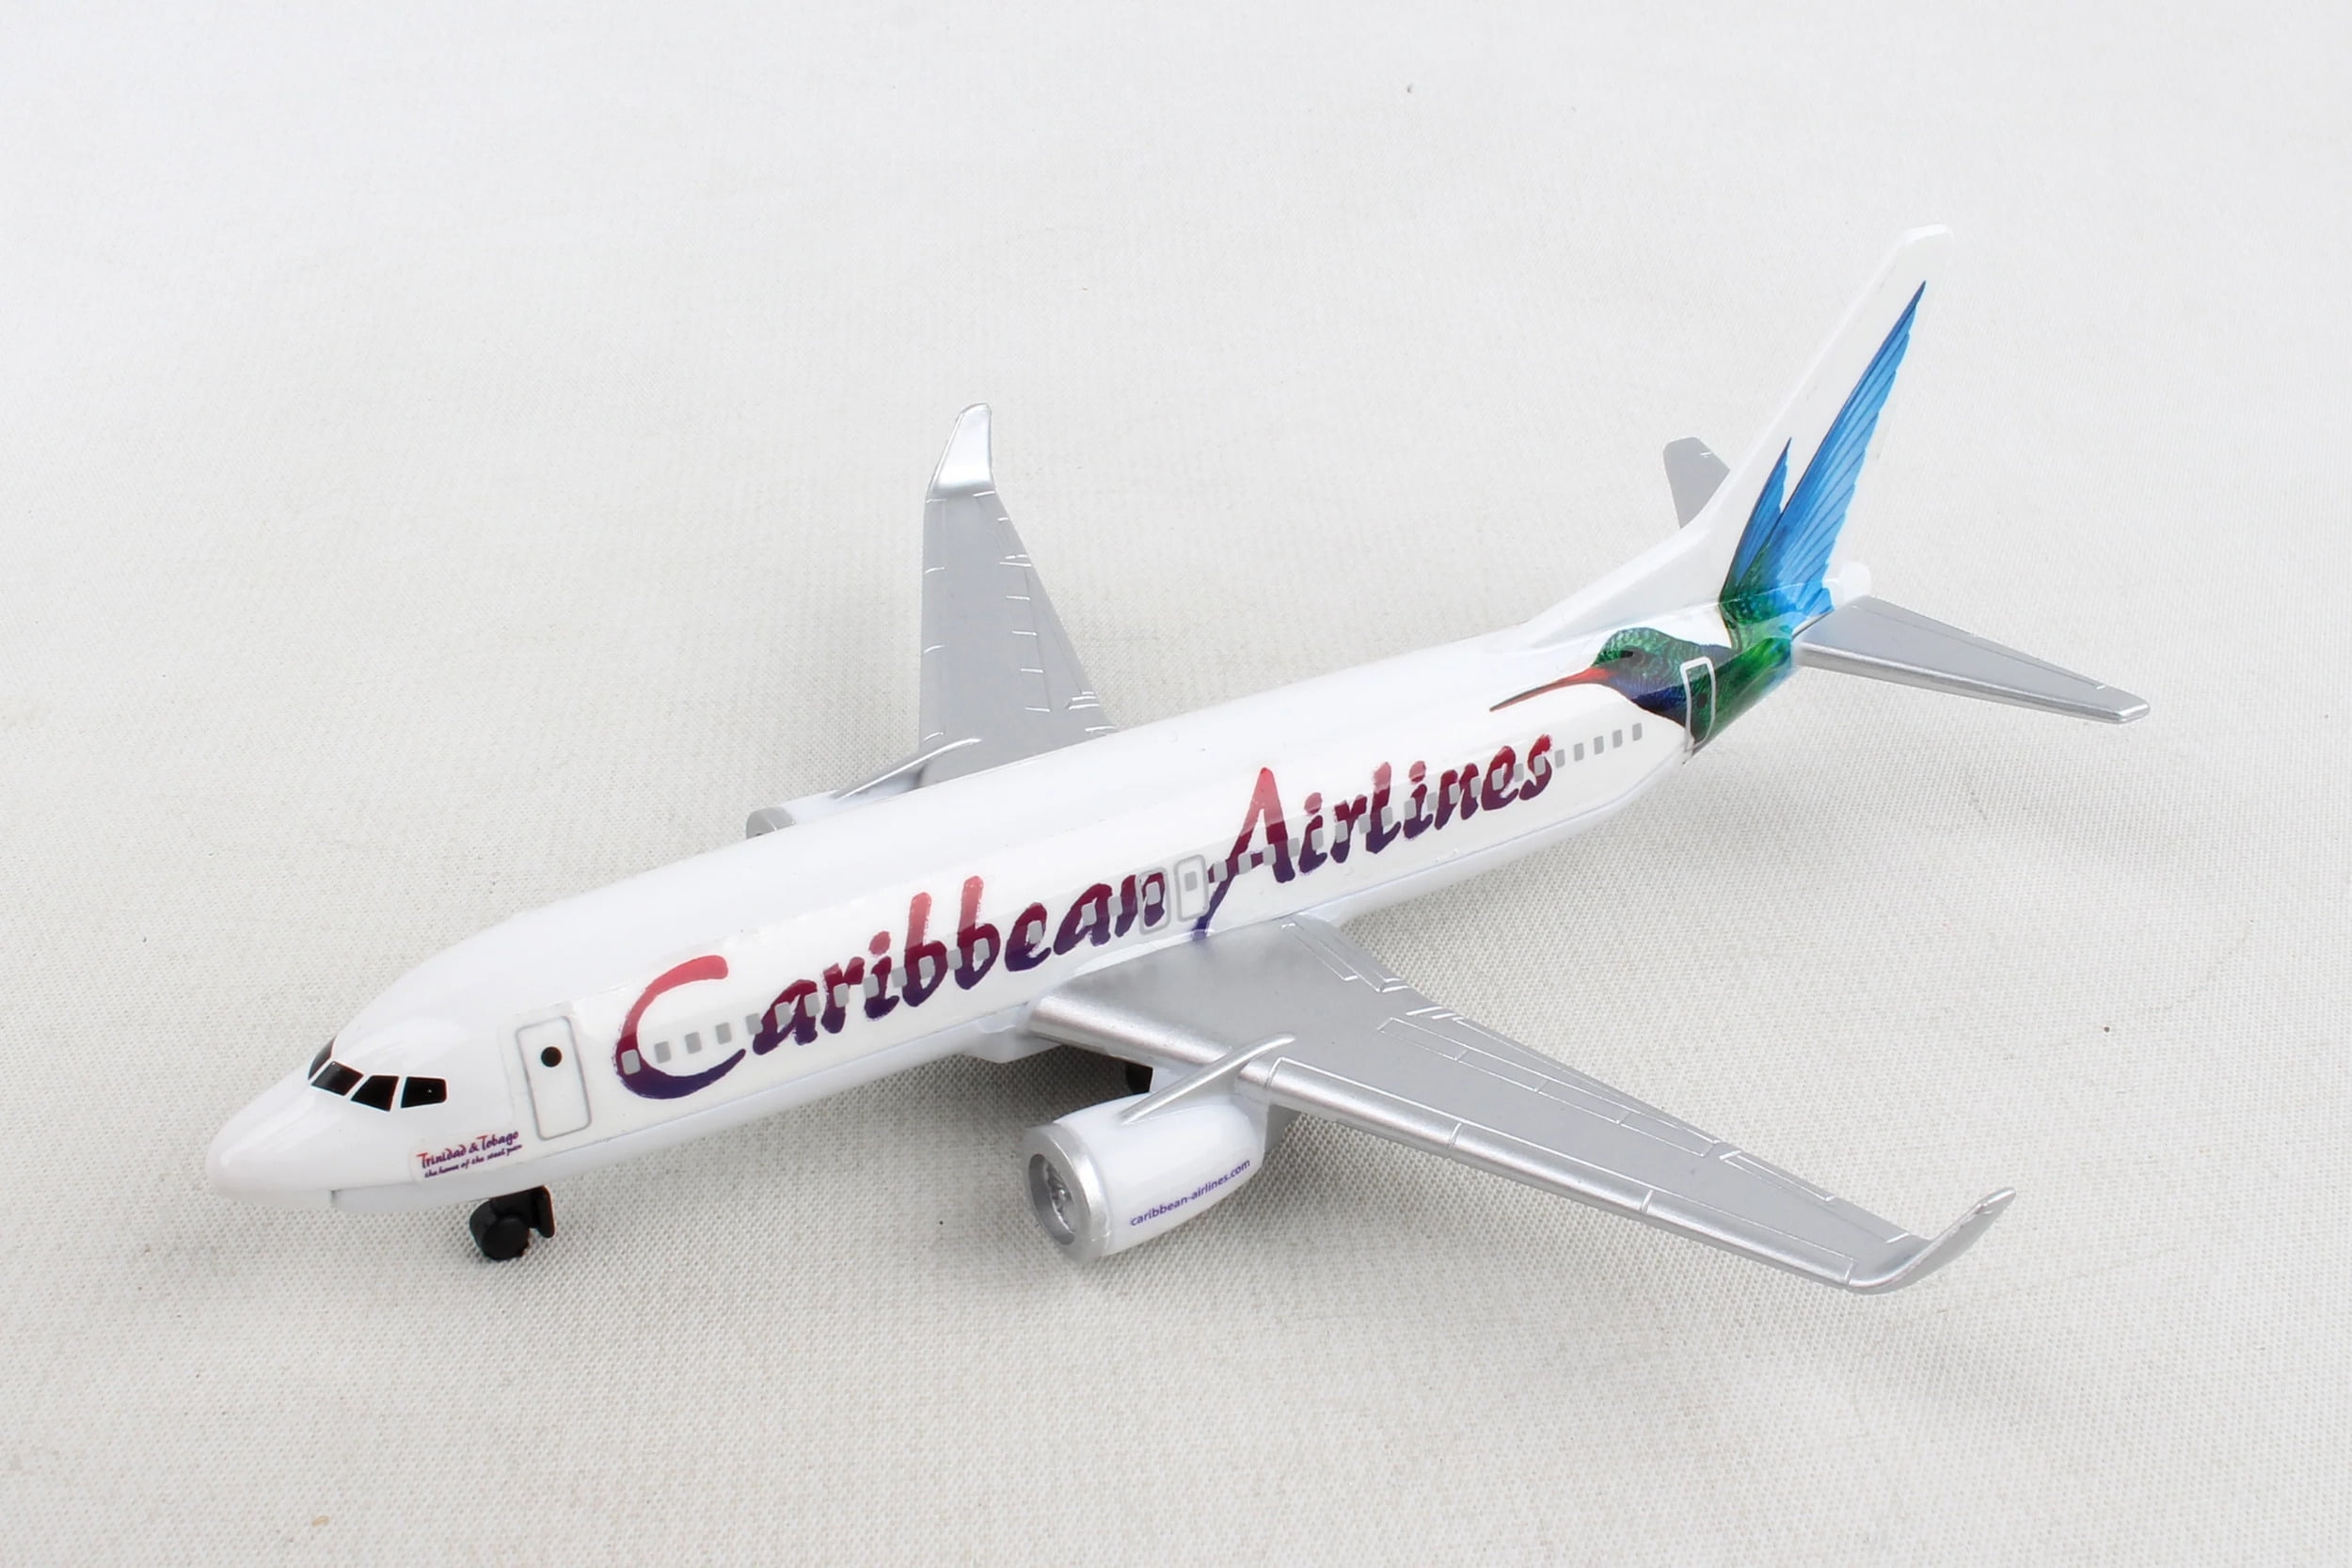 Realtoy RT0374 Caribbean Airlines Airliner Single Model Plane